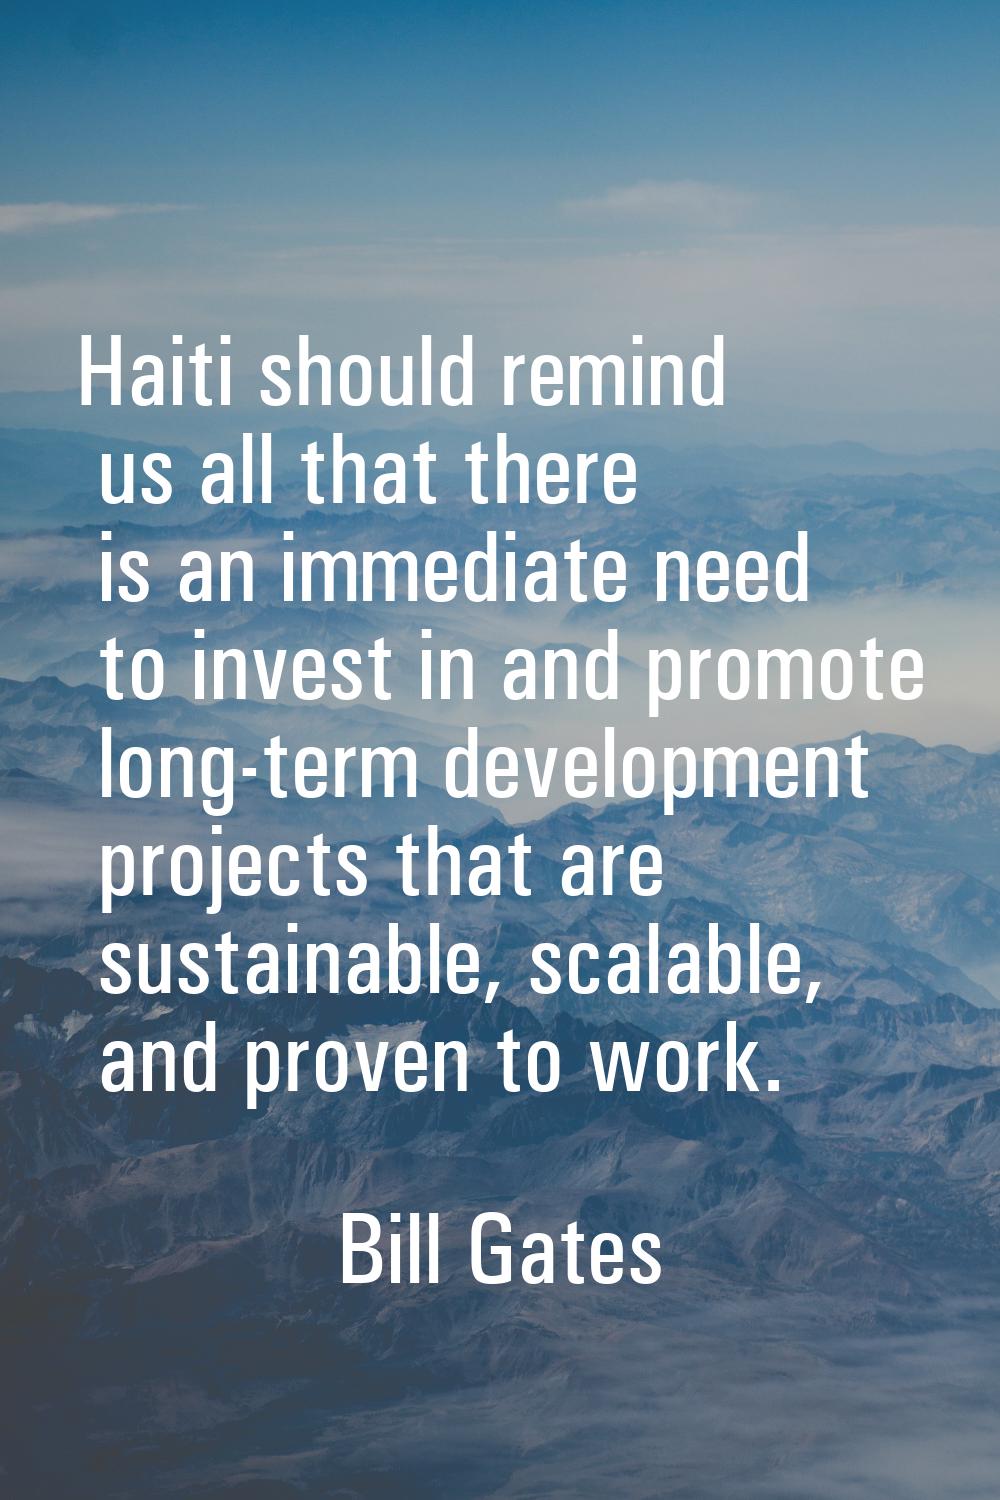 Haiti should remind us all that there is an immediate need to invest in and promote long-term devel